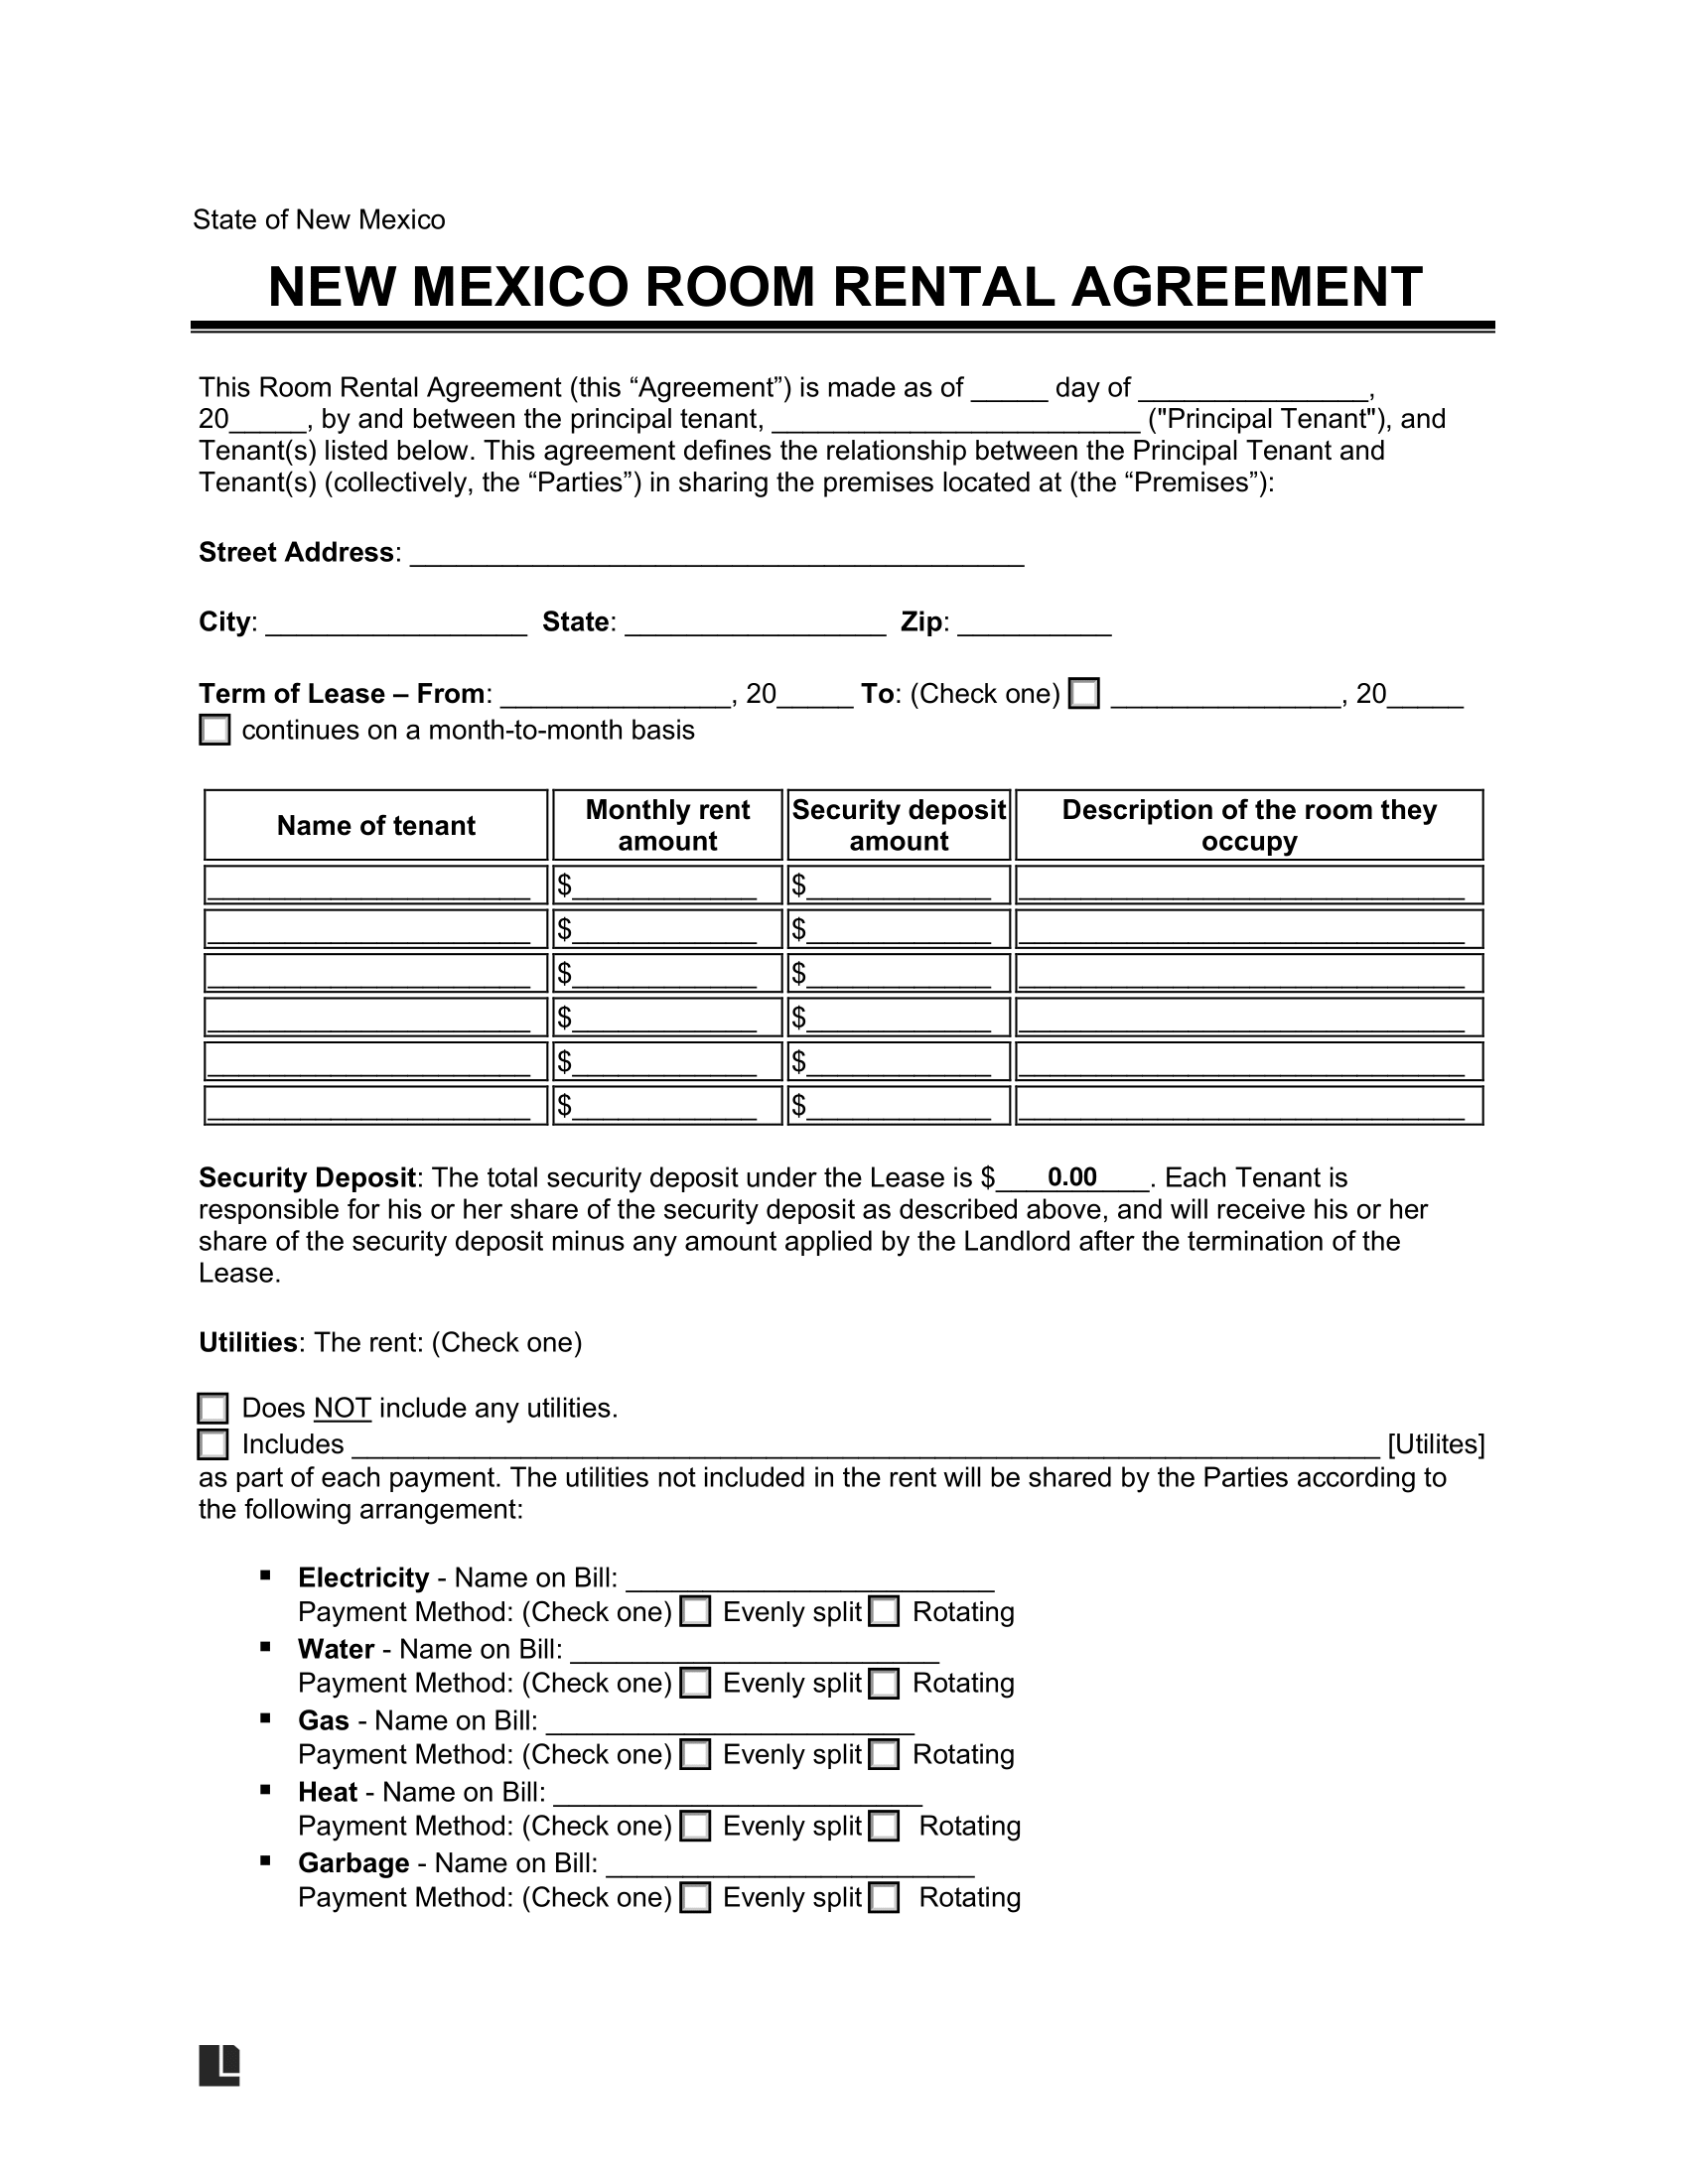 New Mexico Room Rental Agreement